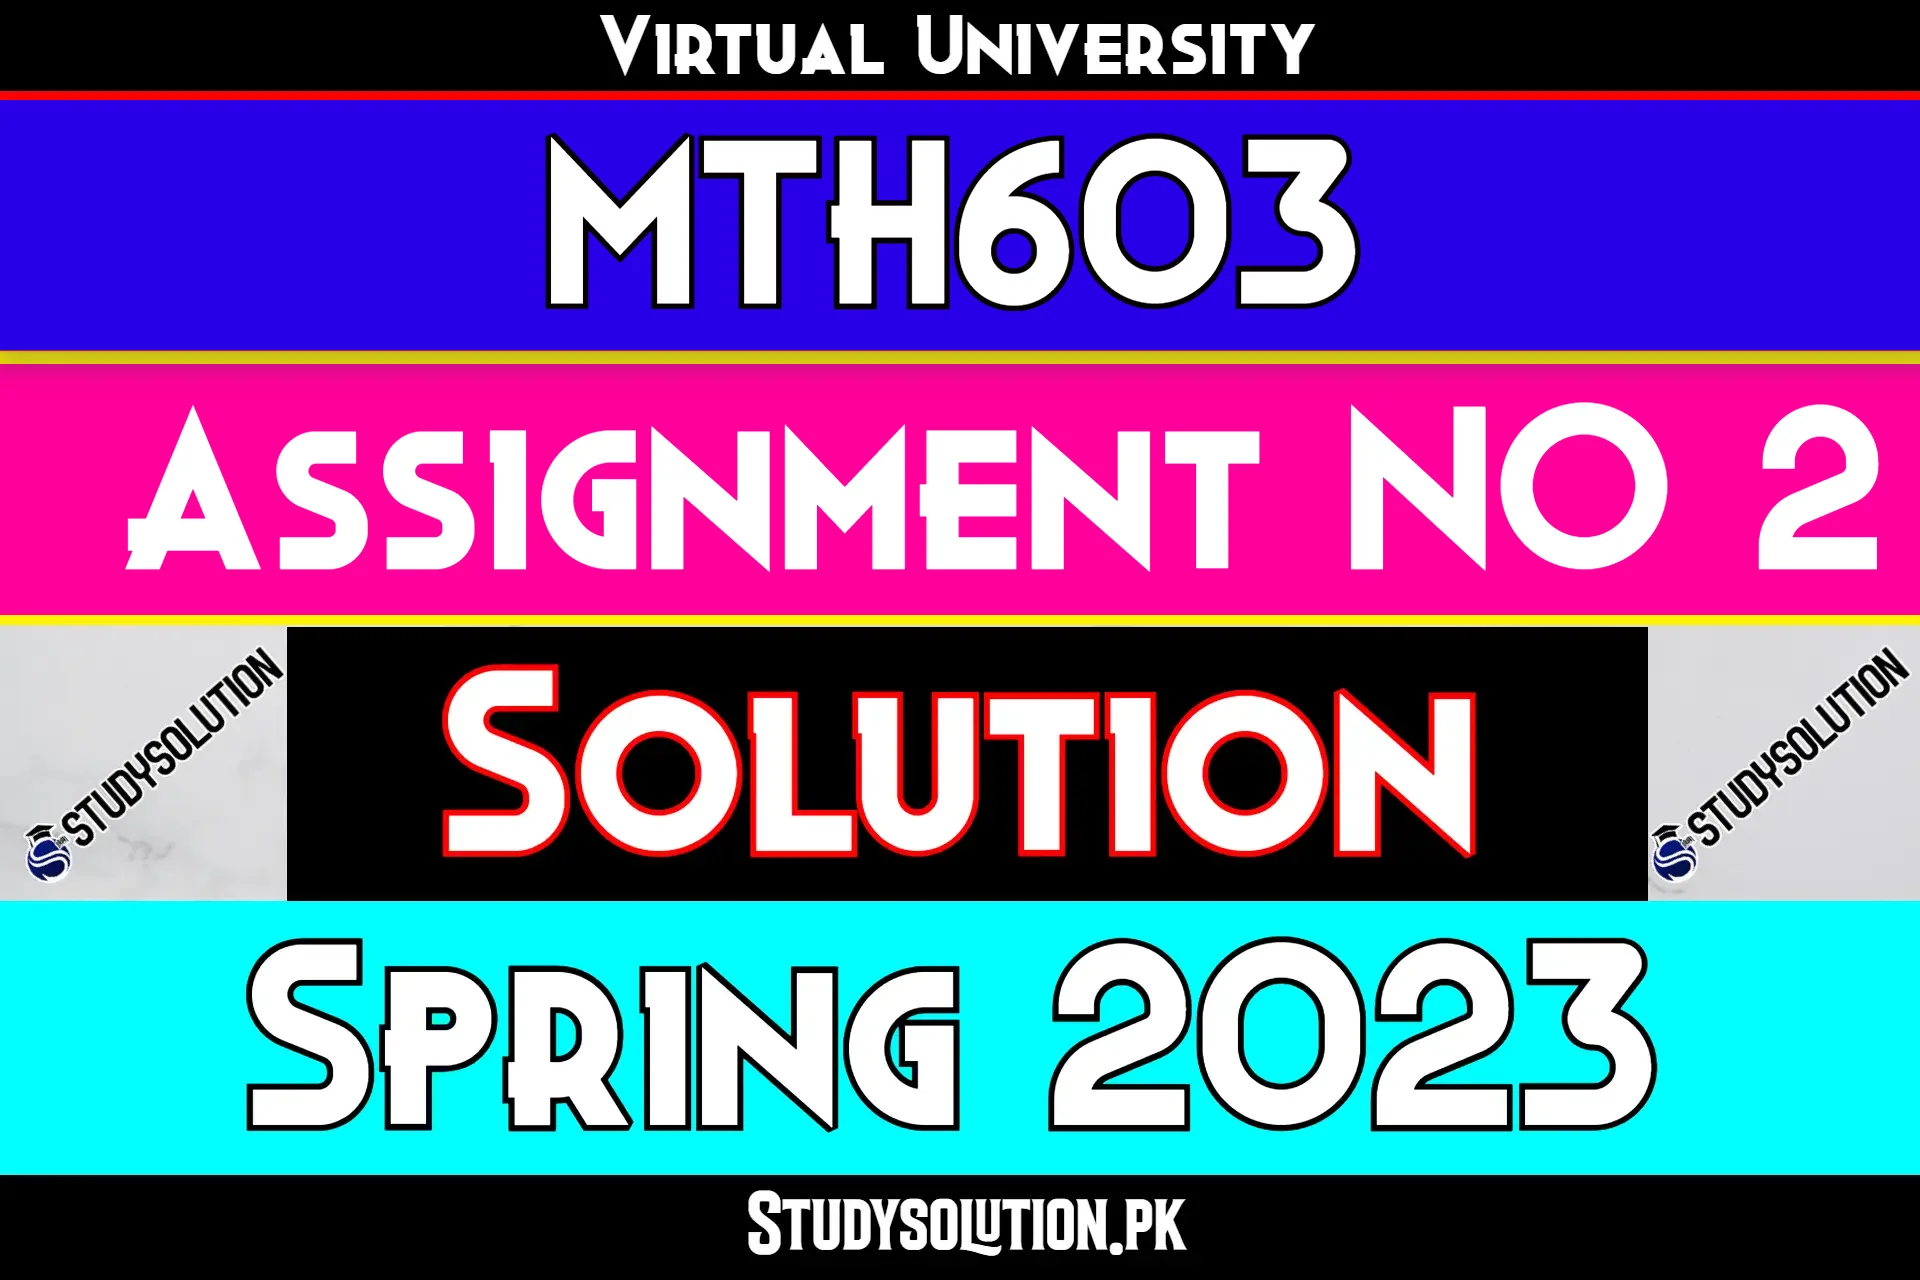 MTH603 Assignment No 2 Solution Spring 2023